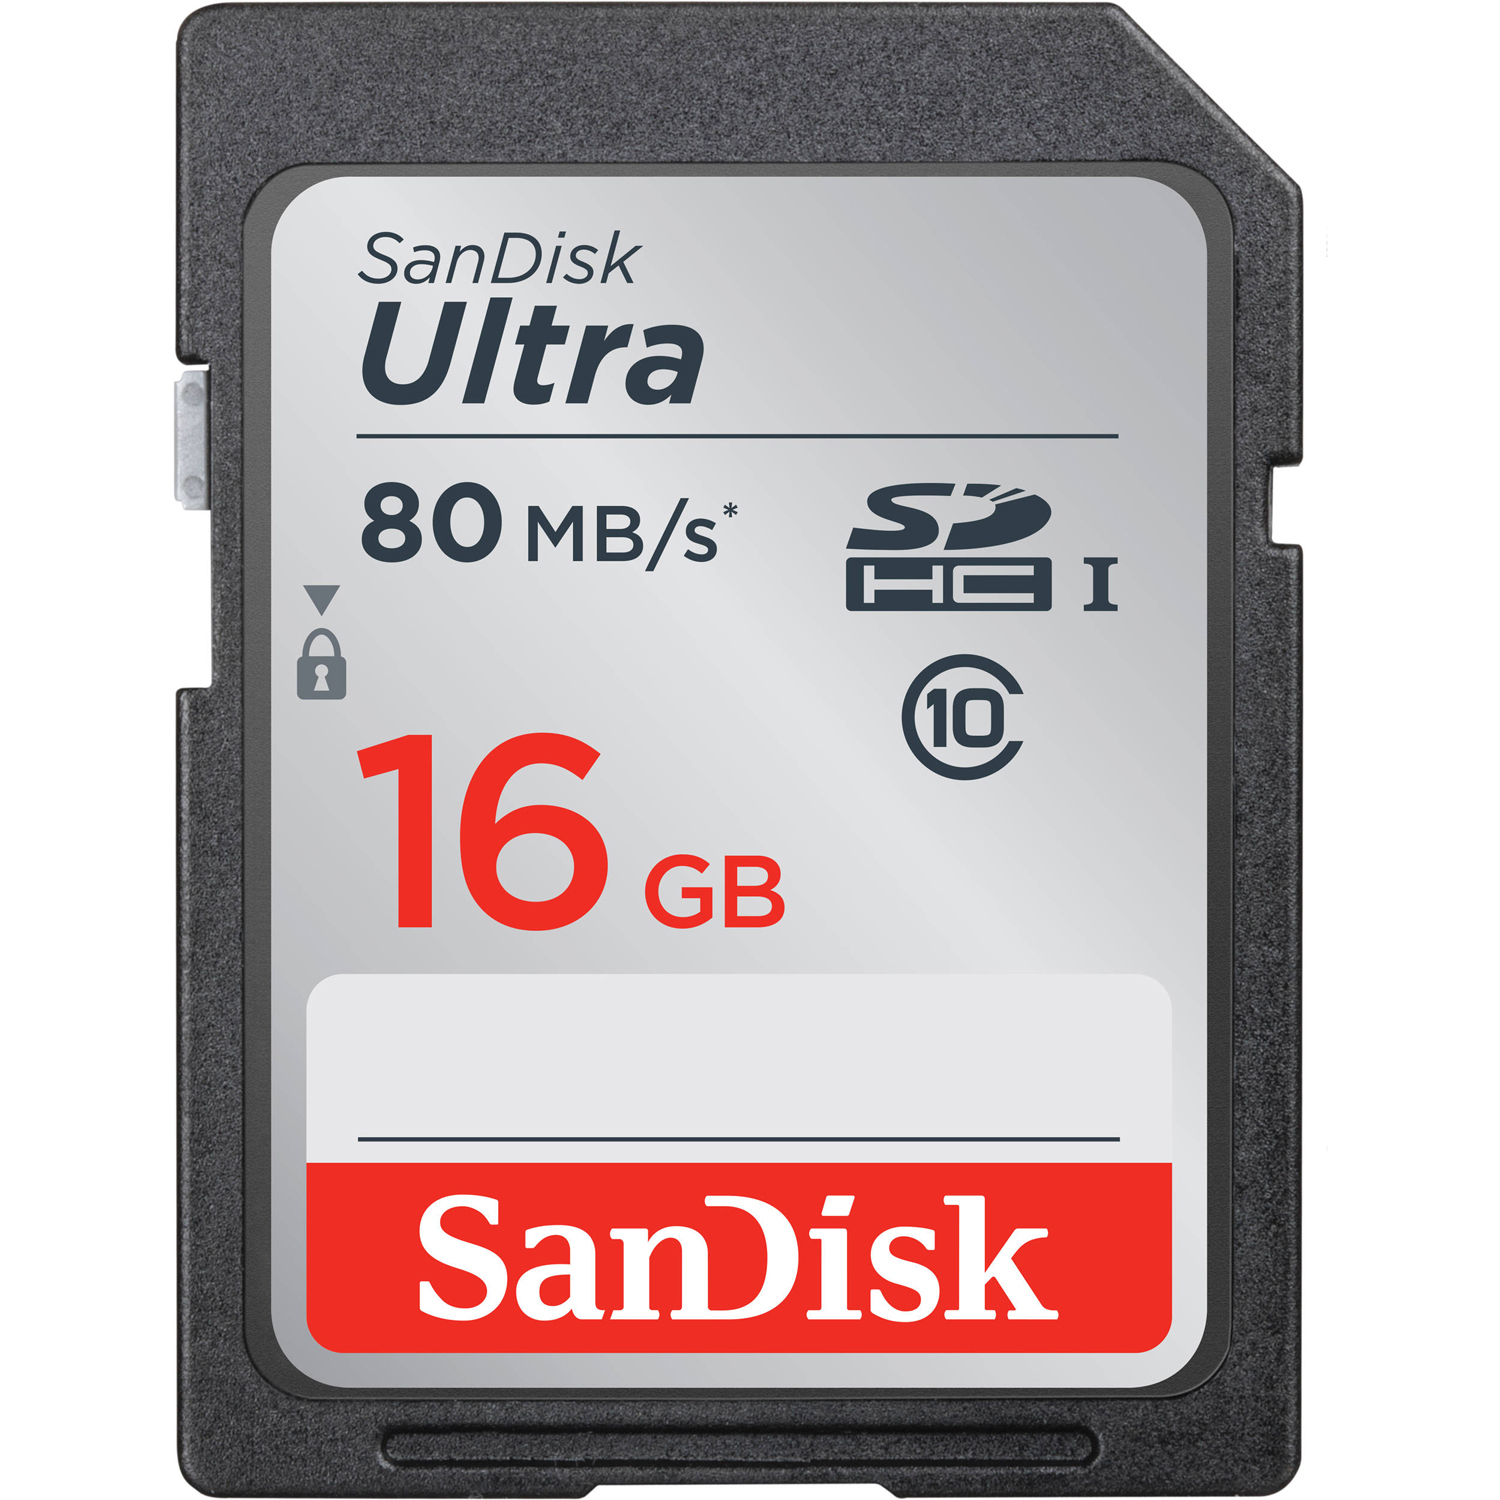 Photos - Memory Card SanDisk Ultra SDHC 16GB UHS Class 10 , Up to 80MB/s Read Speed 